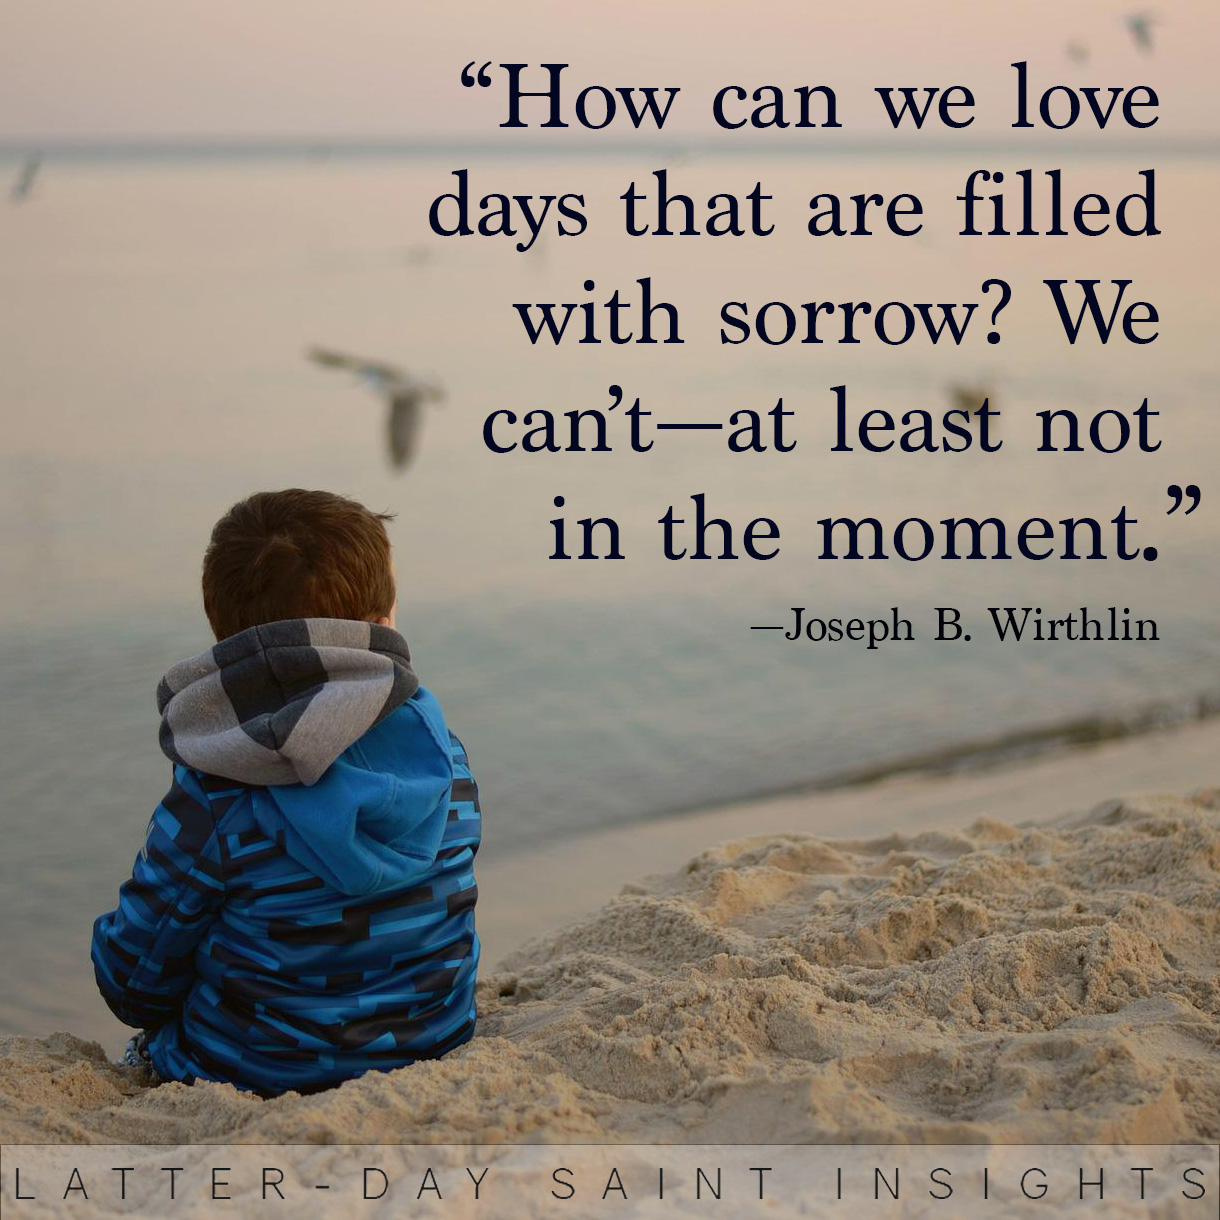 “How can we love days that are filled with sorrow? We can’t—at least not in the moment.” By Joseph B. Wirthlin